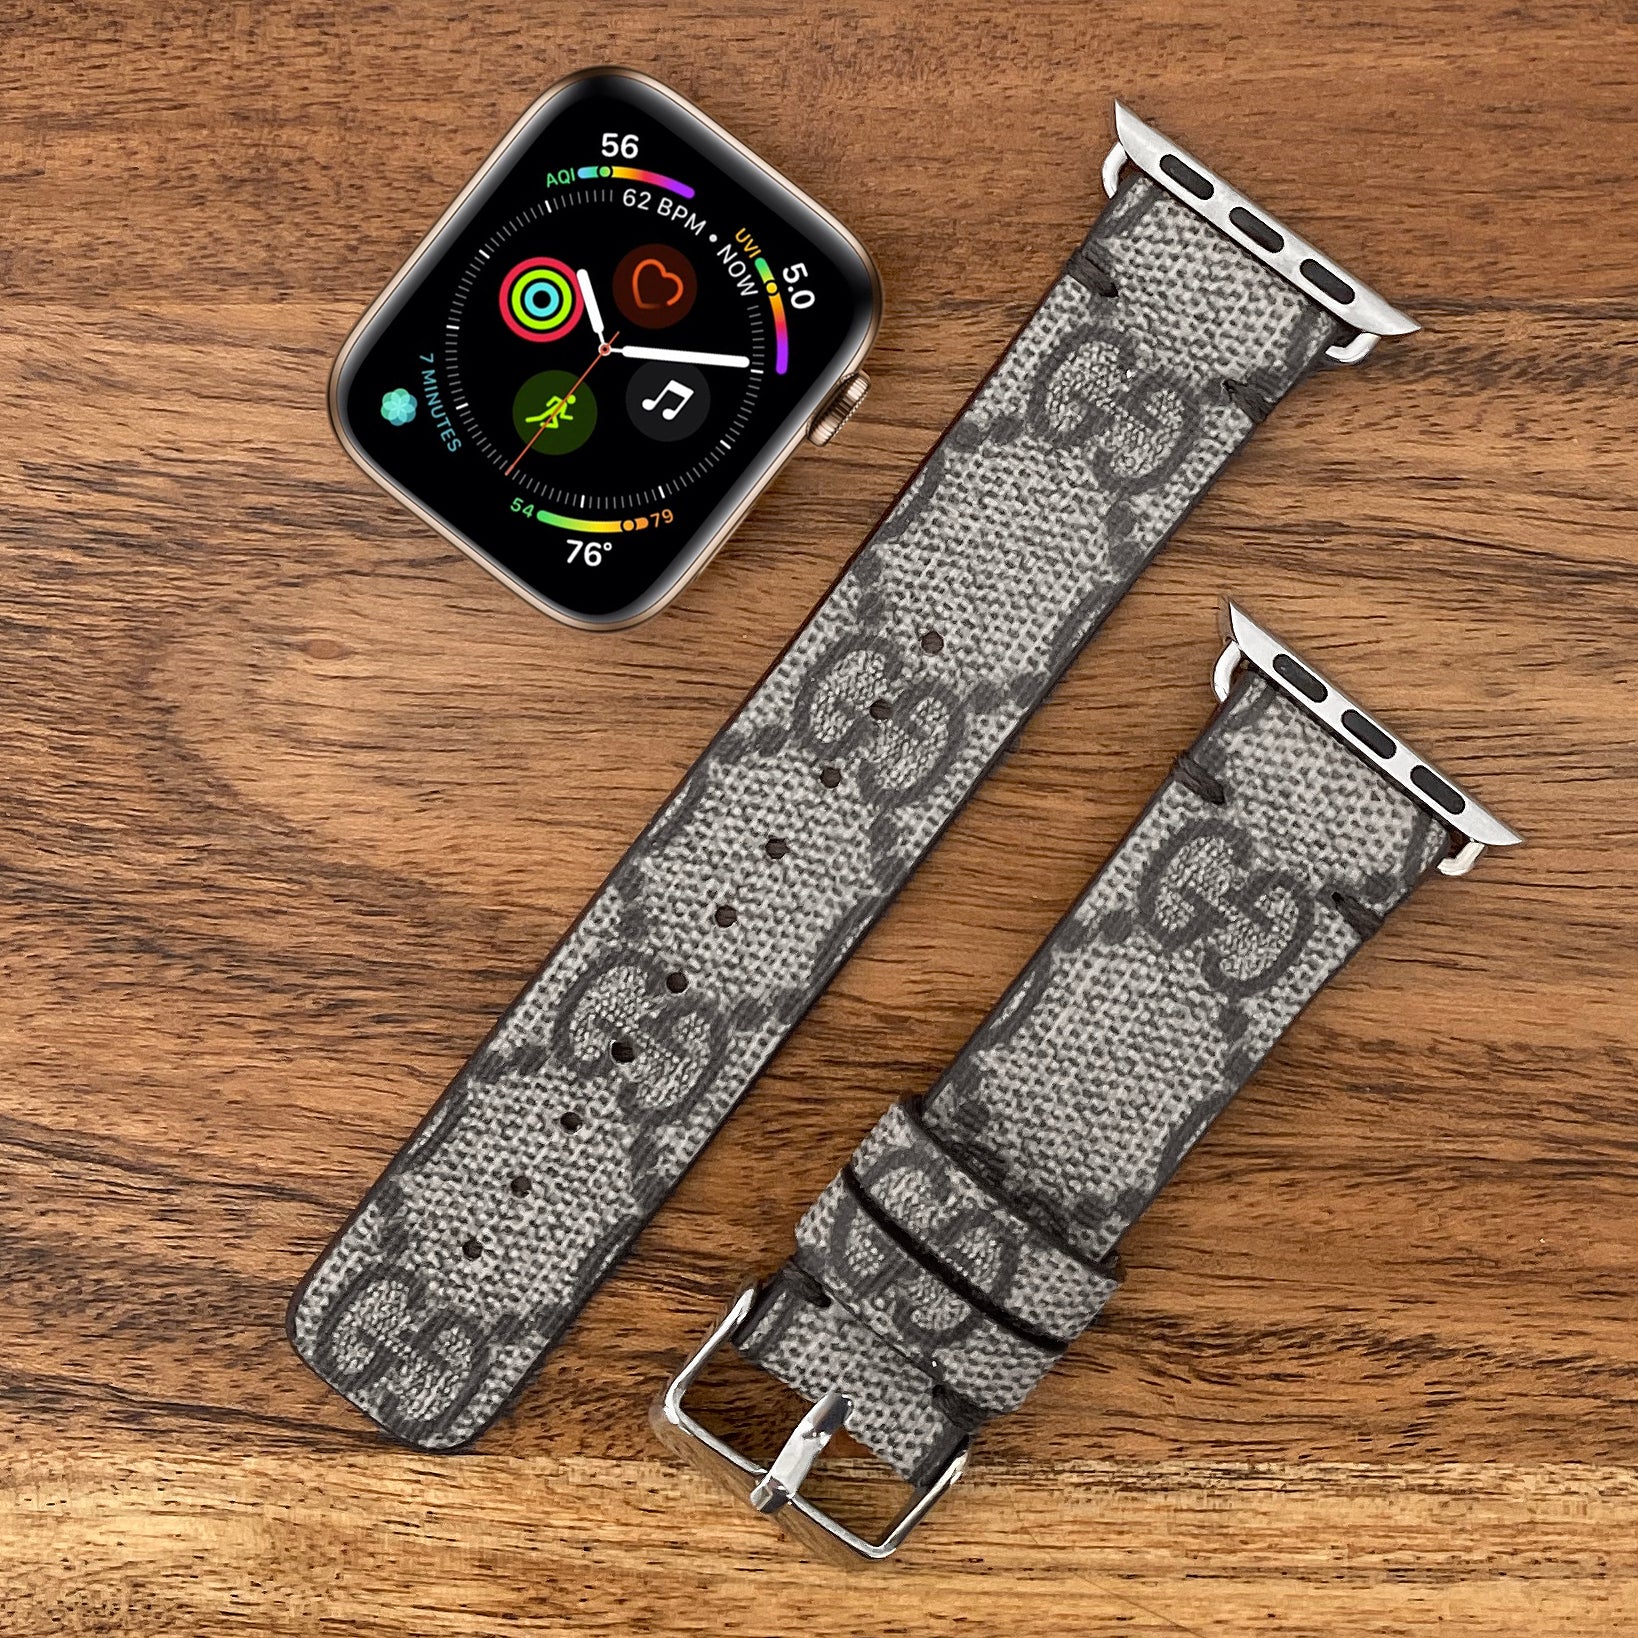 Handmade Authentic Repurposed Luxury High End Apple Watch band